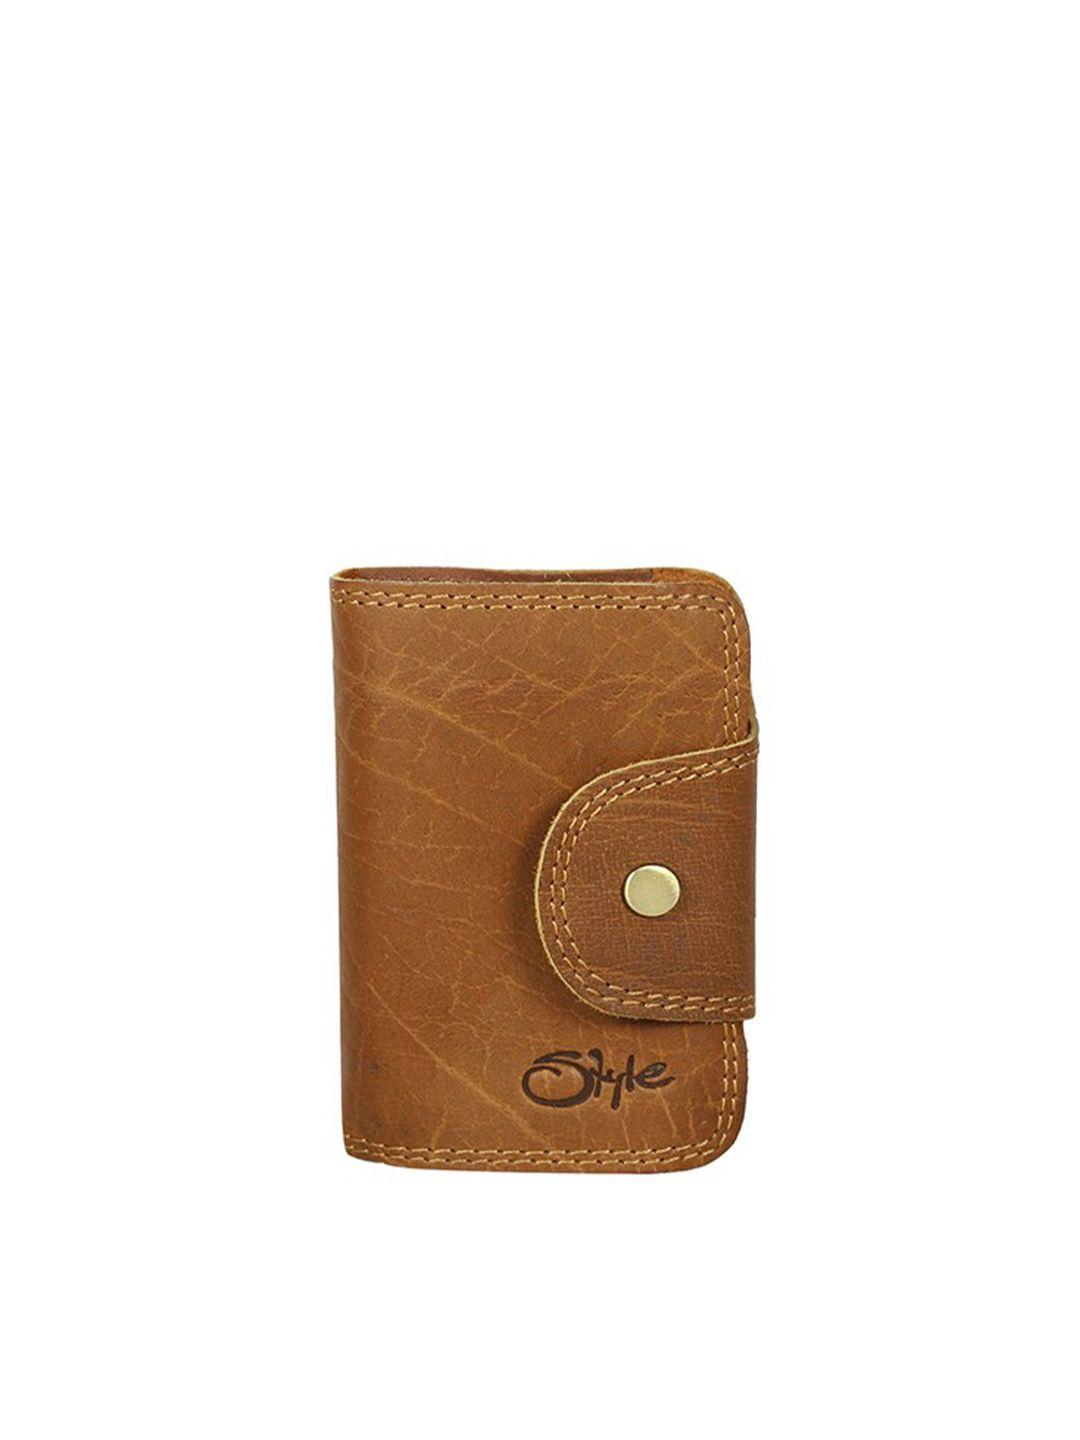 style shoes unisex tan leather card holder